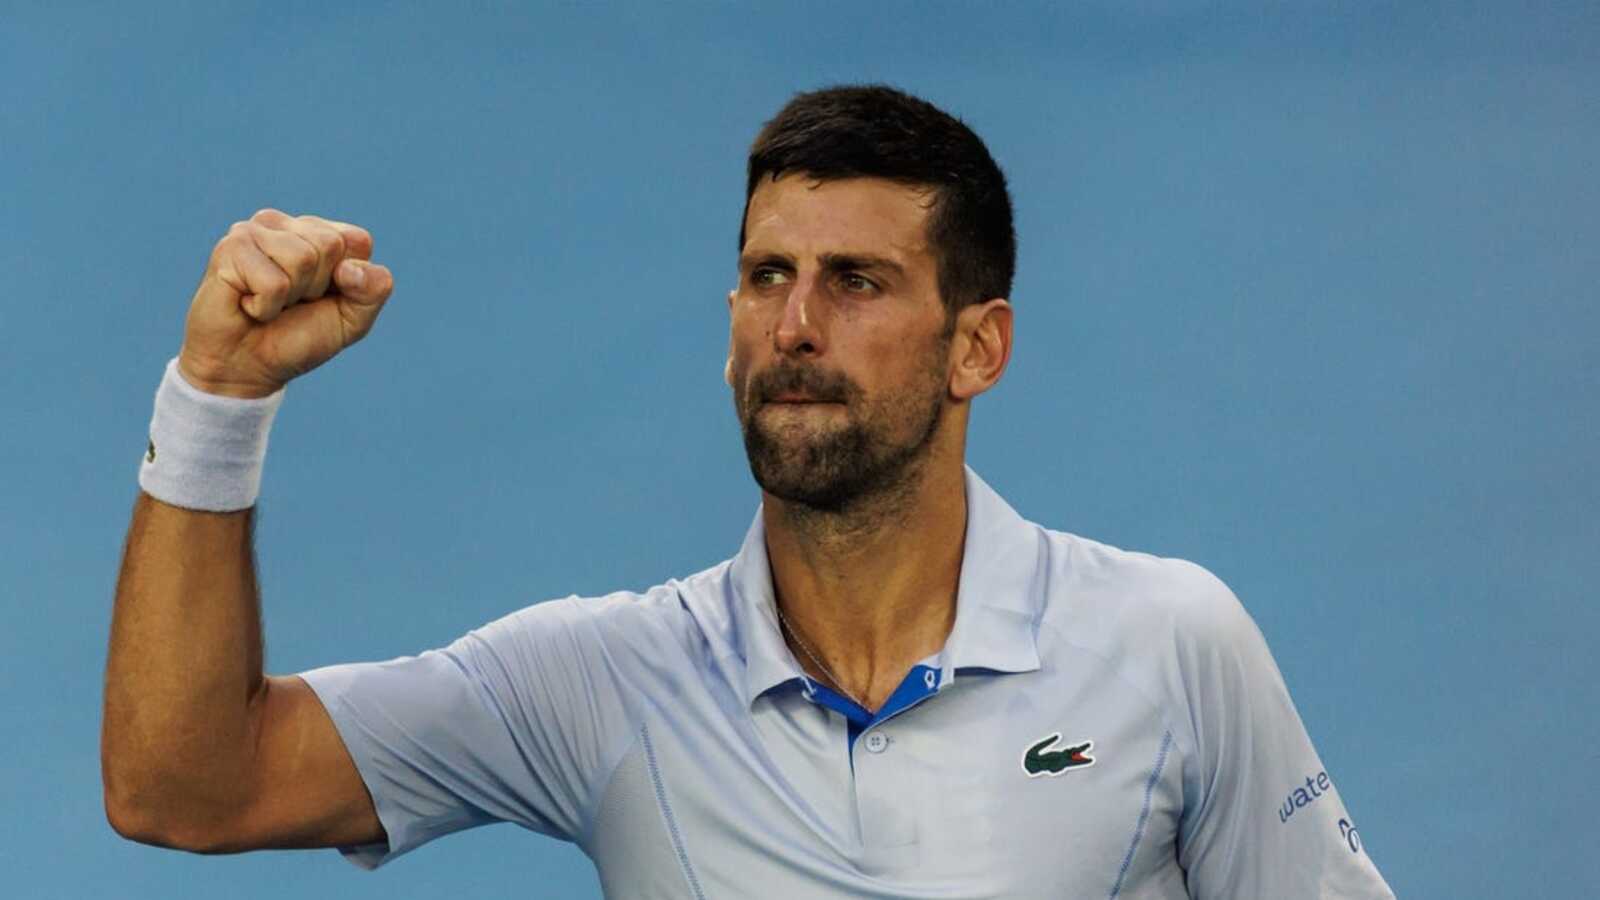 Novak Djokovic odds-on favorite with Carlos Alcaraz out of Aussie Open